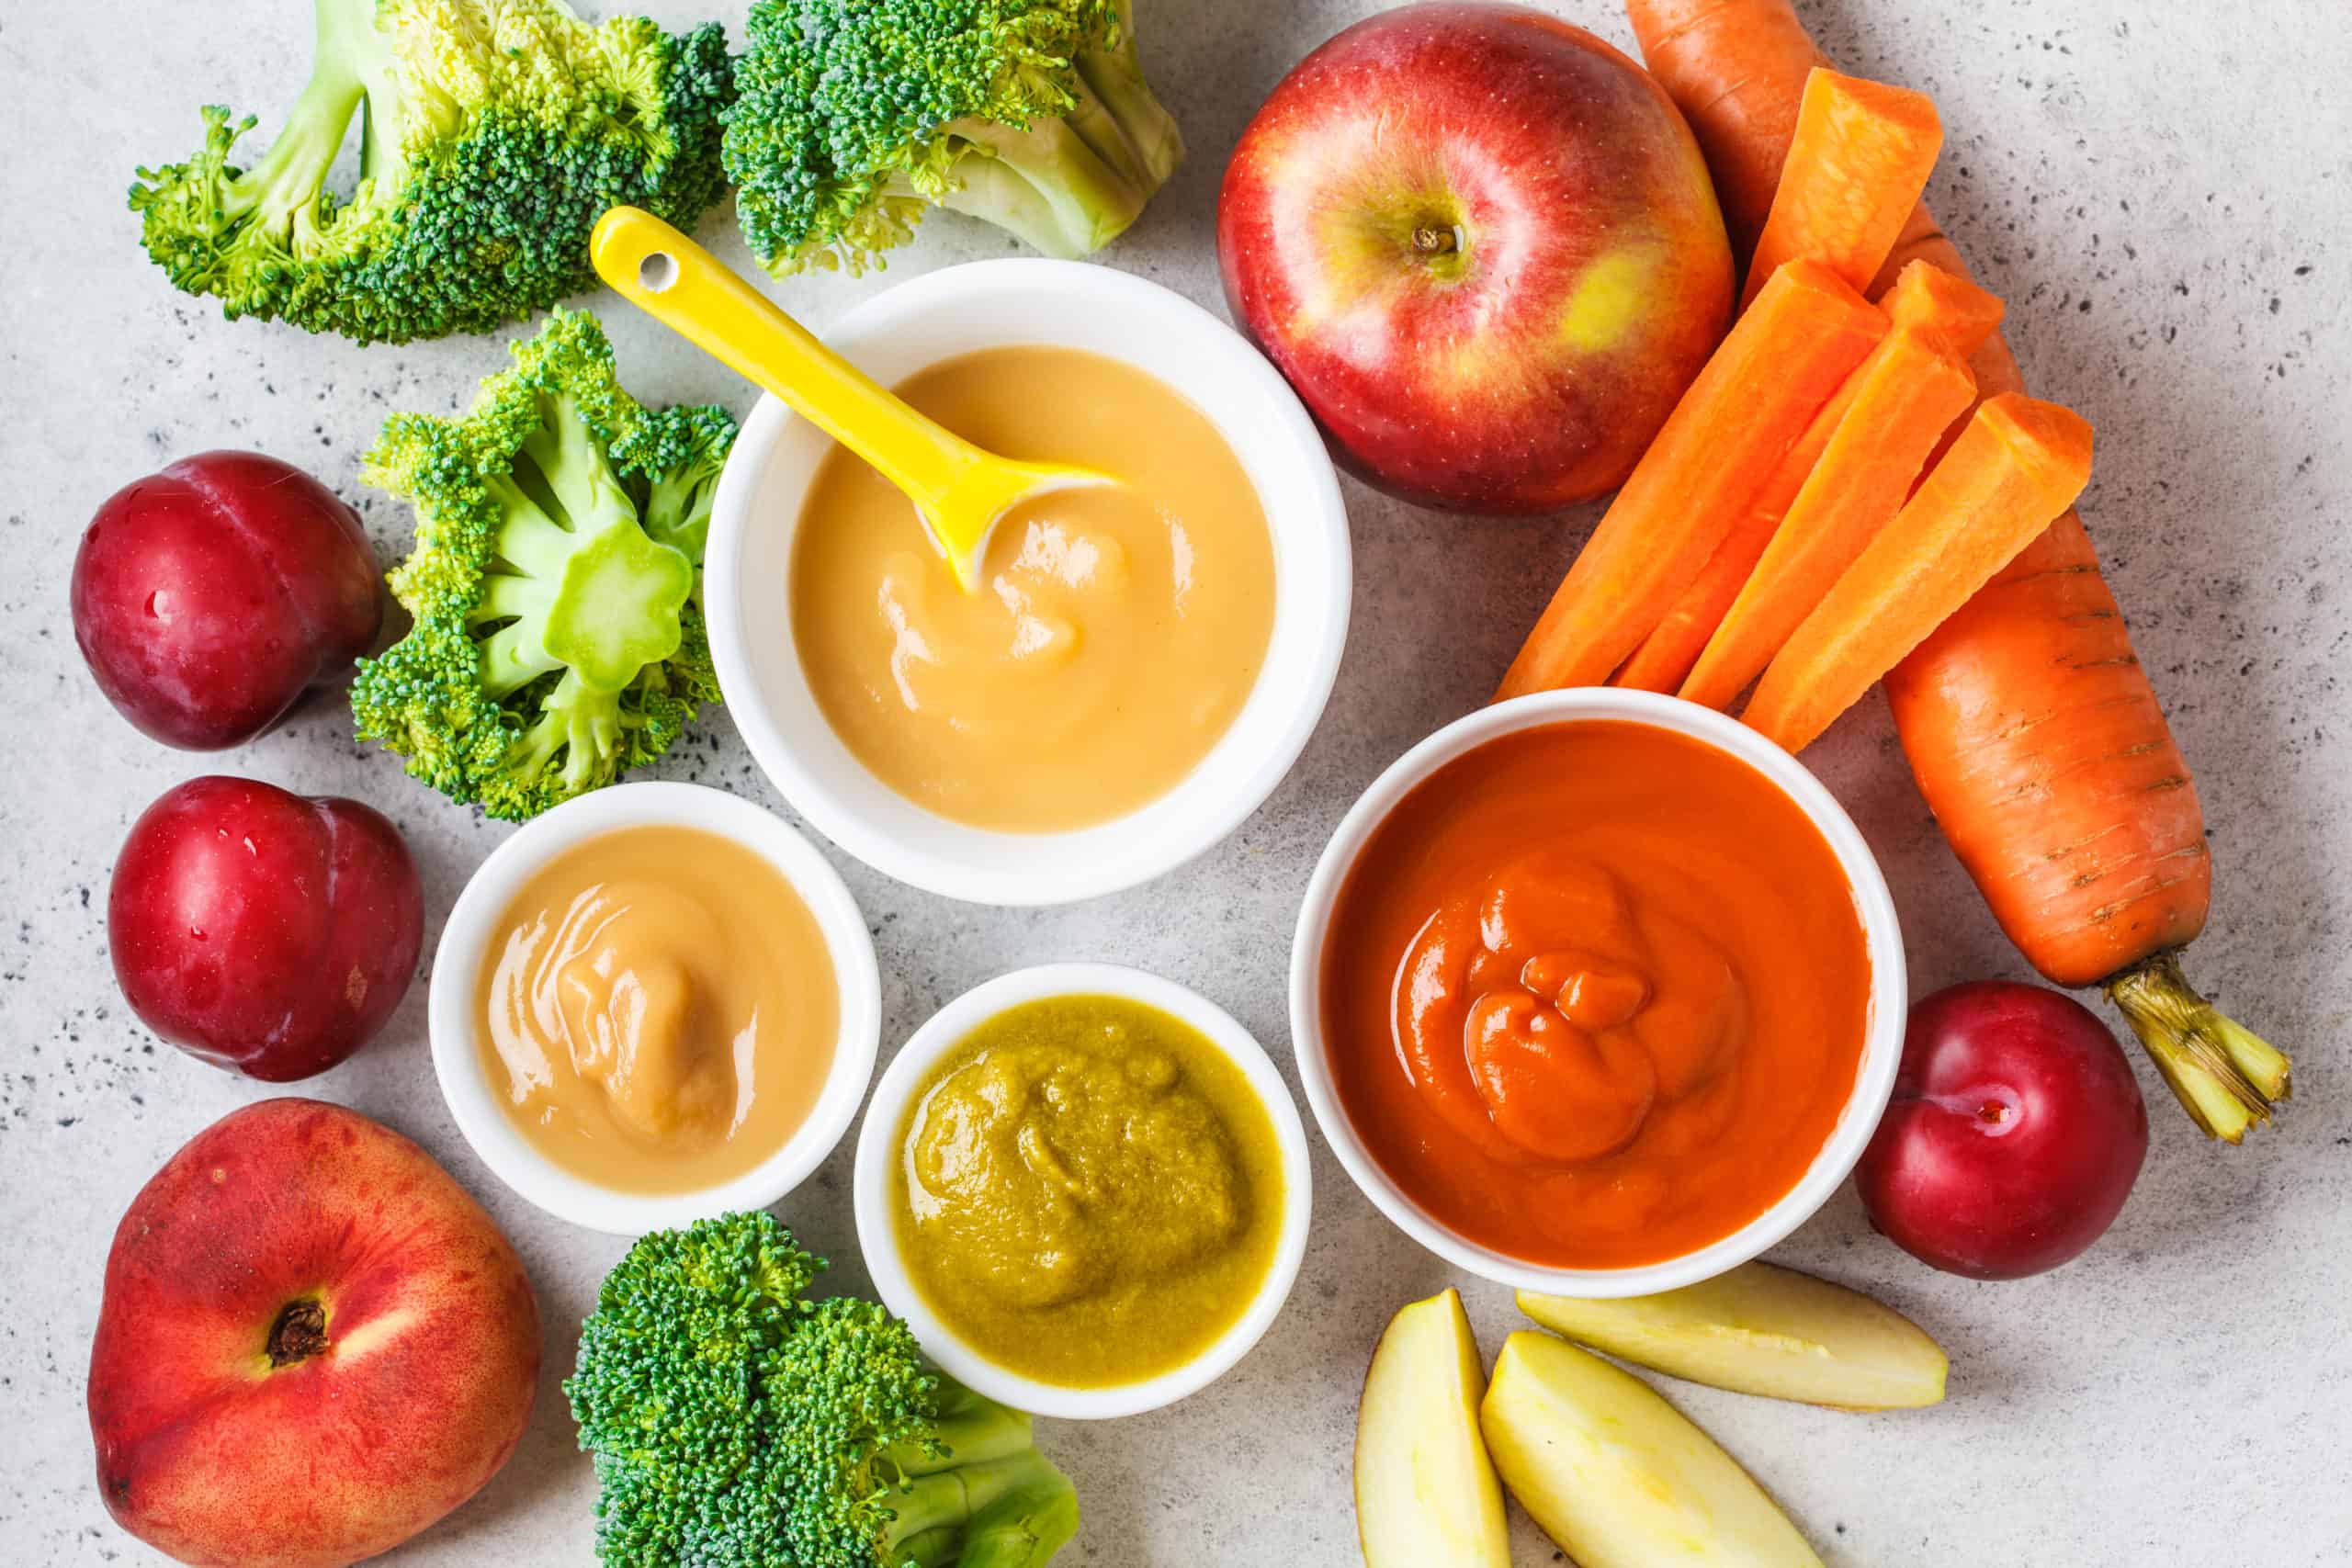 10 of the best Homemade baby food recipes 2